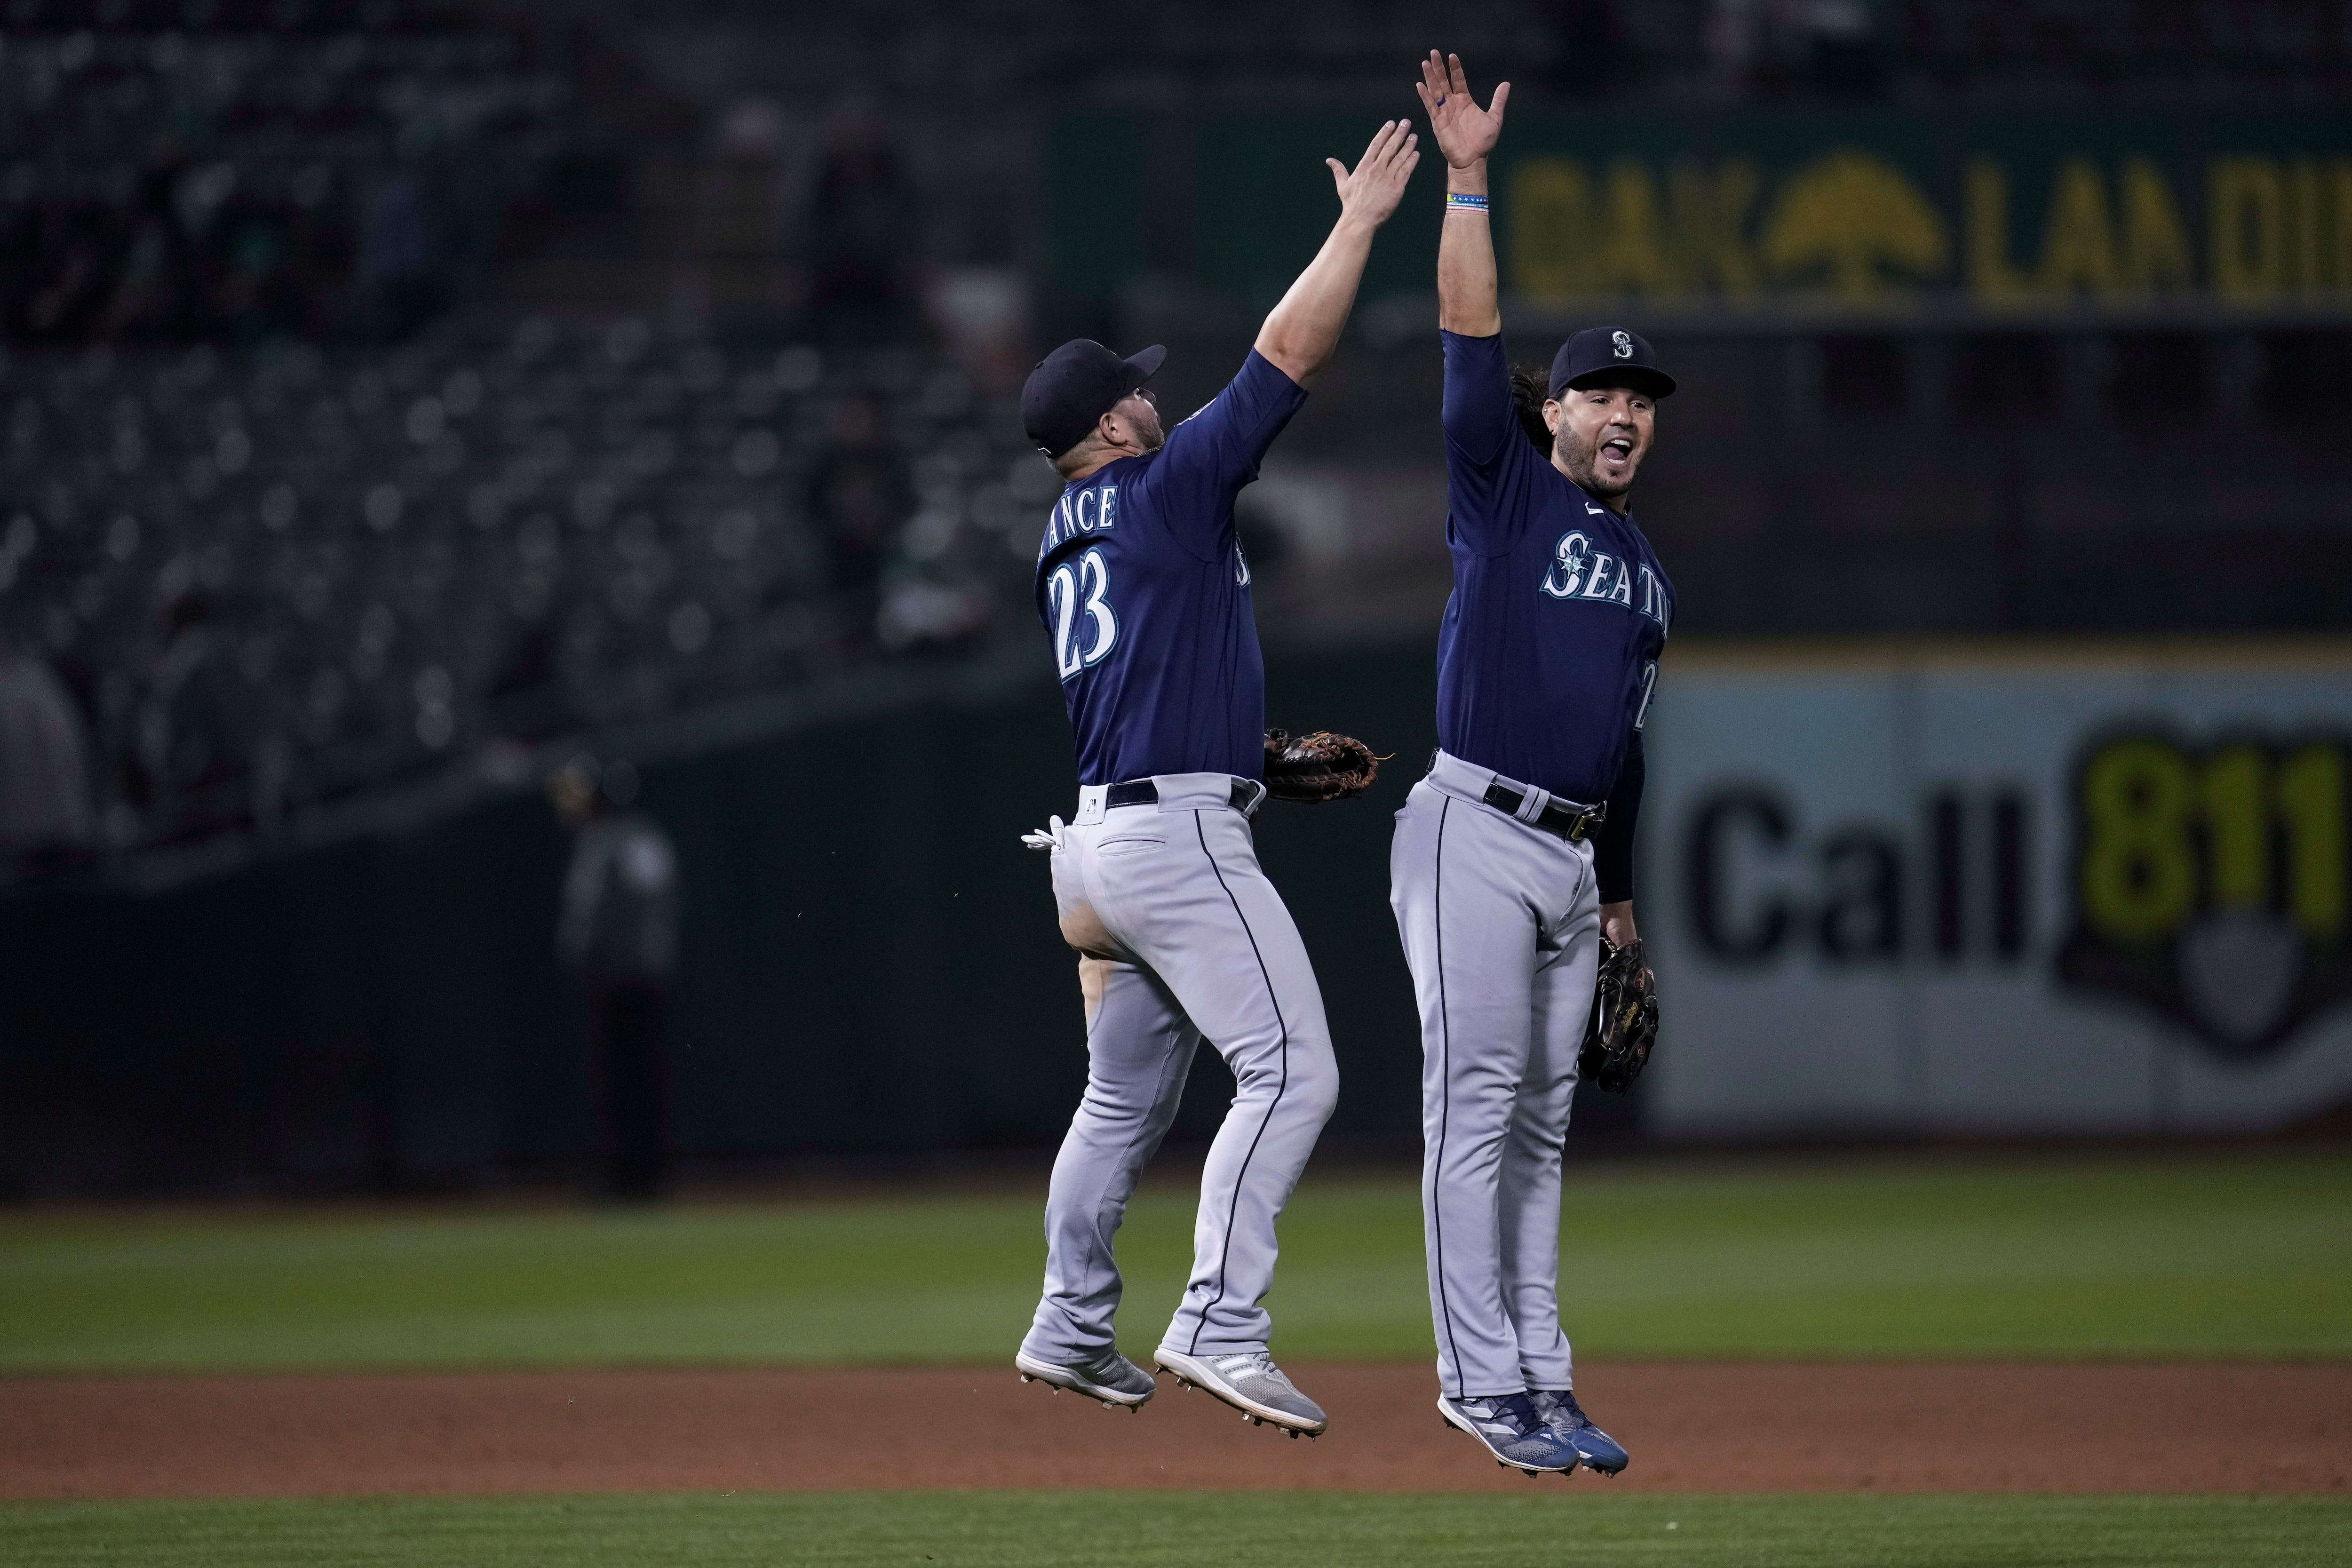 Suárez belts 2 homers, Crawford has 1 as Mariners beat Astros 5-1 - Newsday